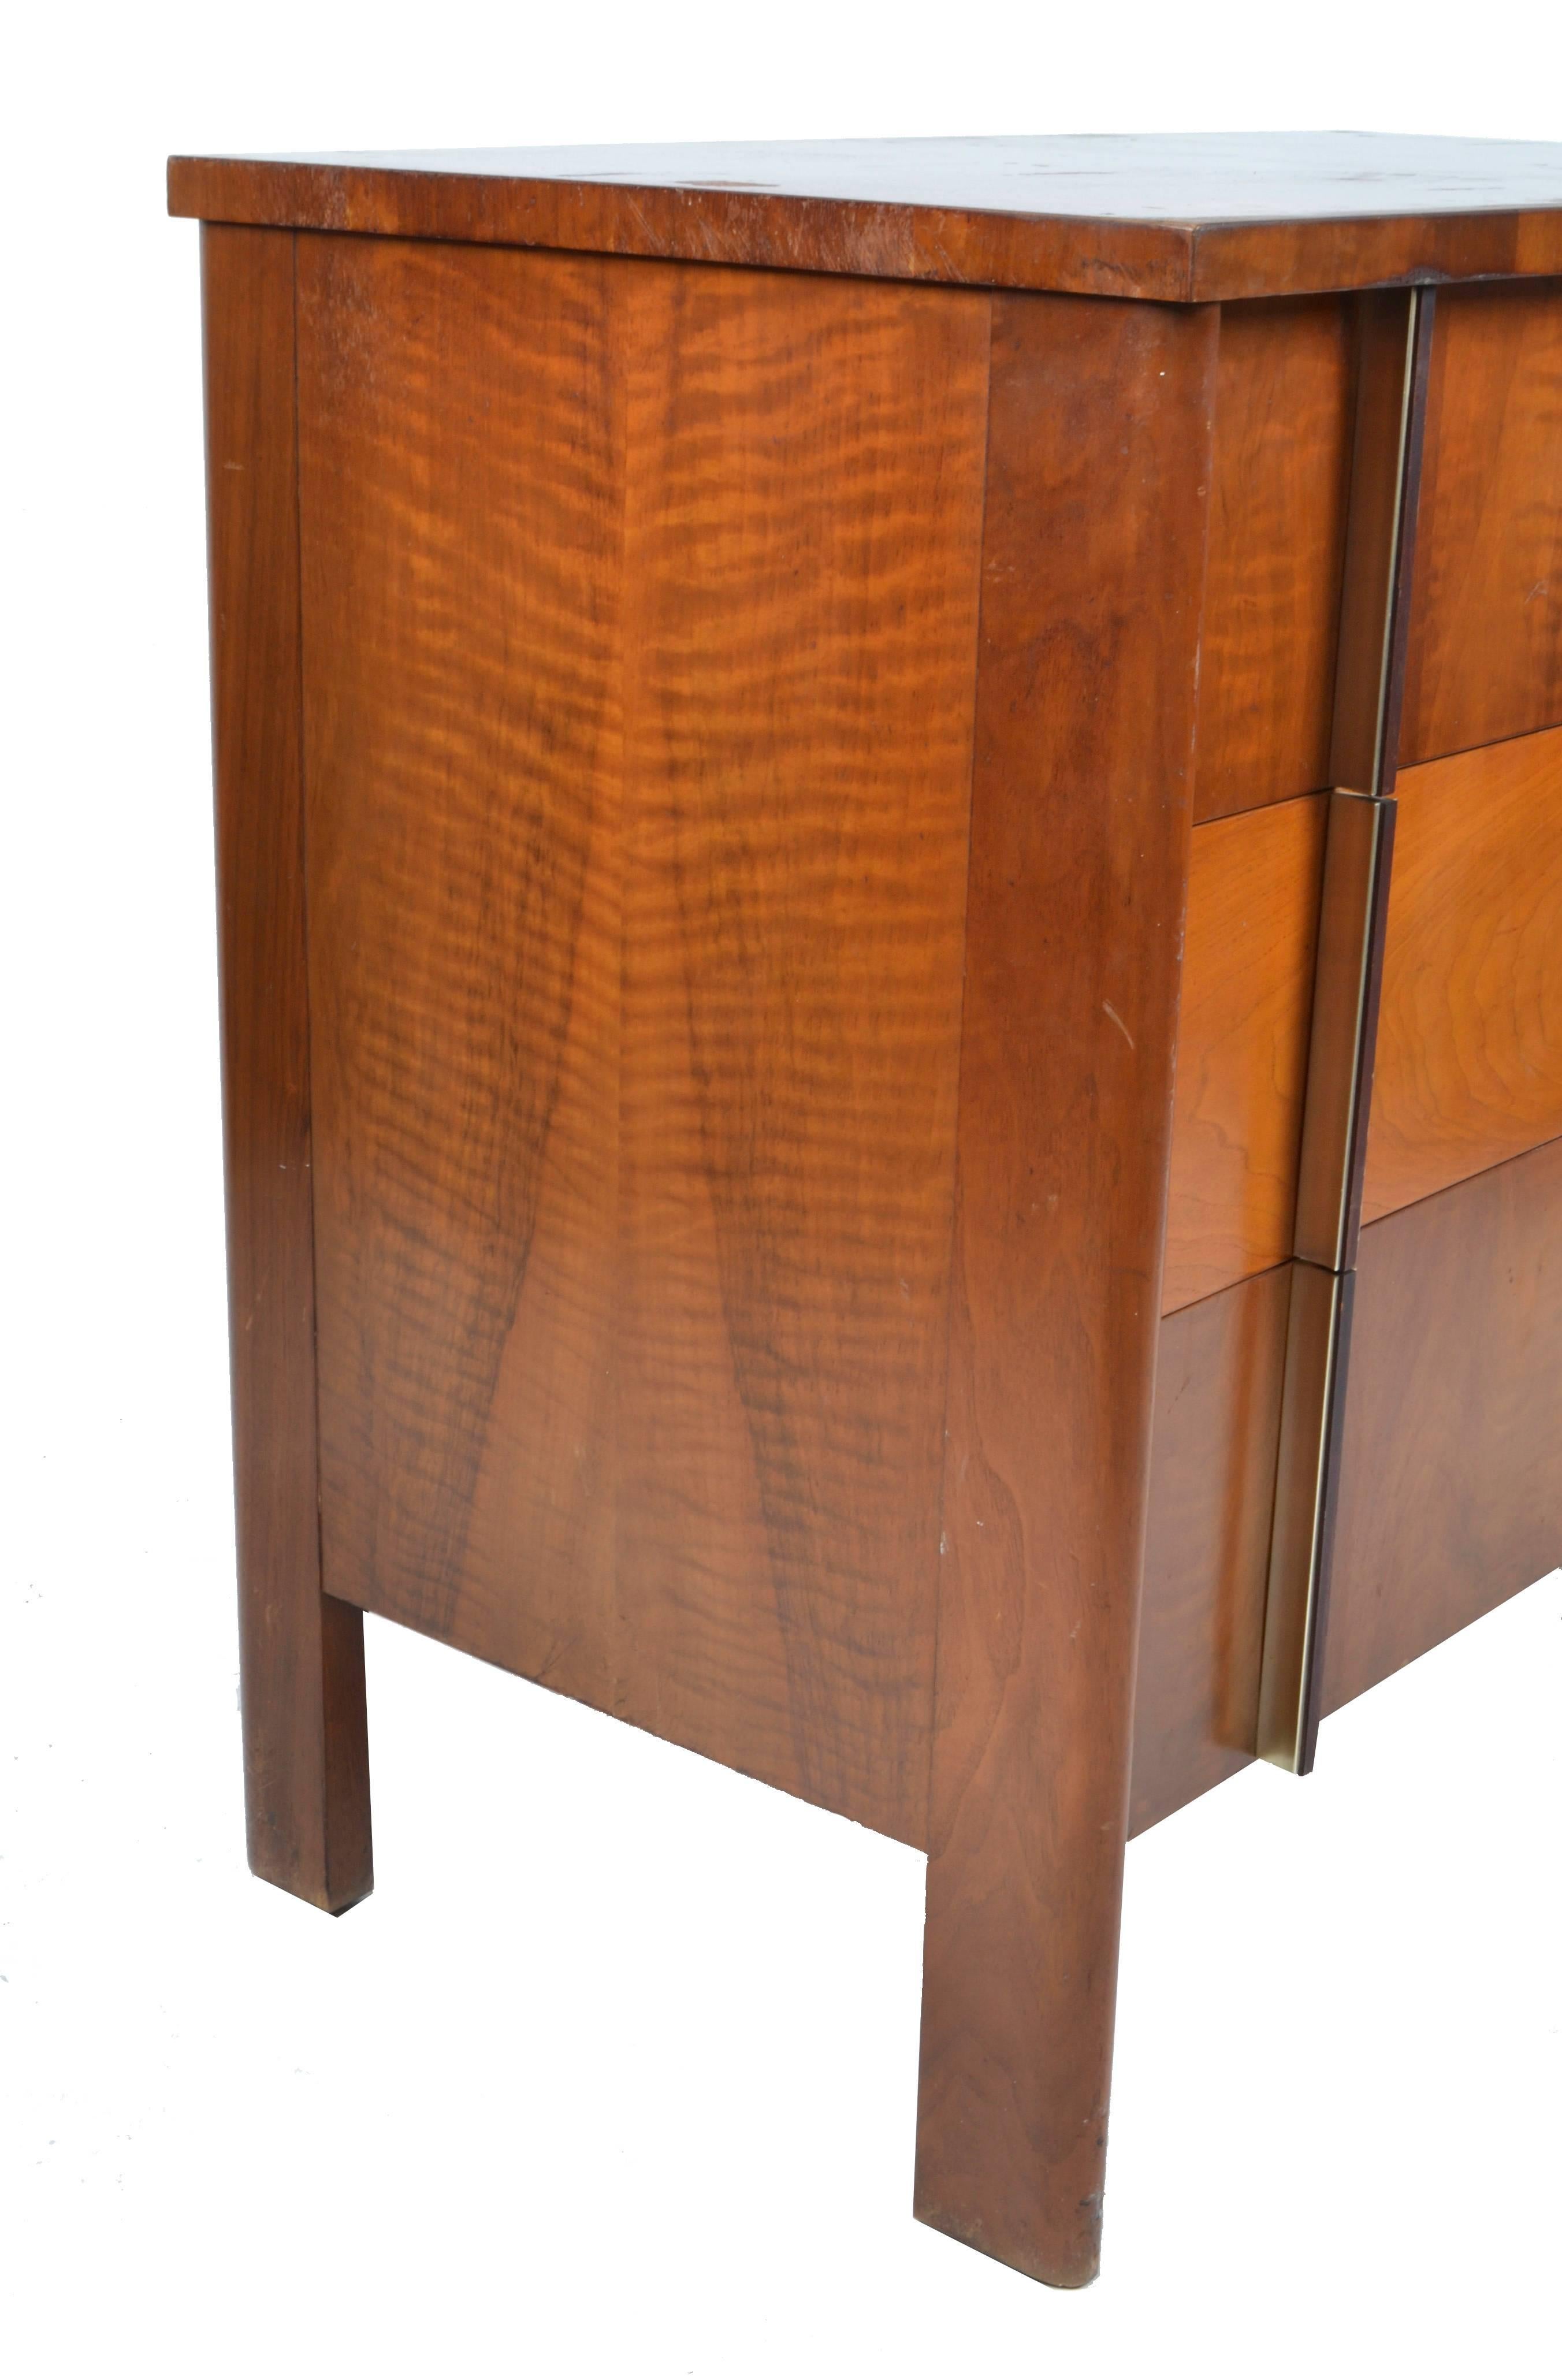 Hand-Crafted Dale Ford For John Widdicomb Chest of Drawers Dresser Walnut Mid-Century Modern  For Sale